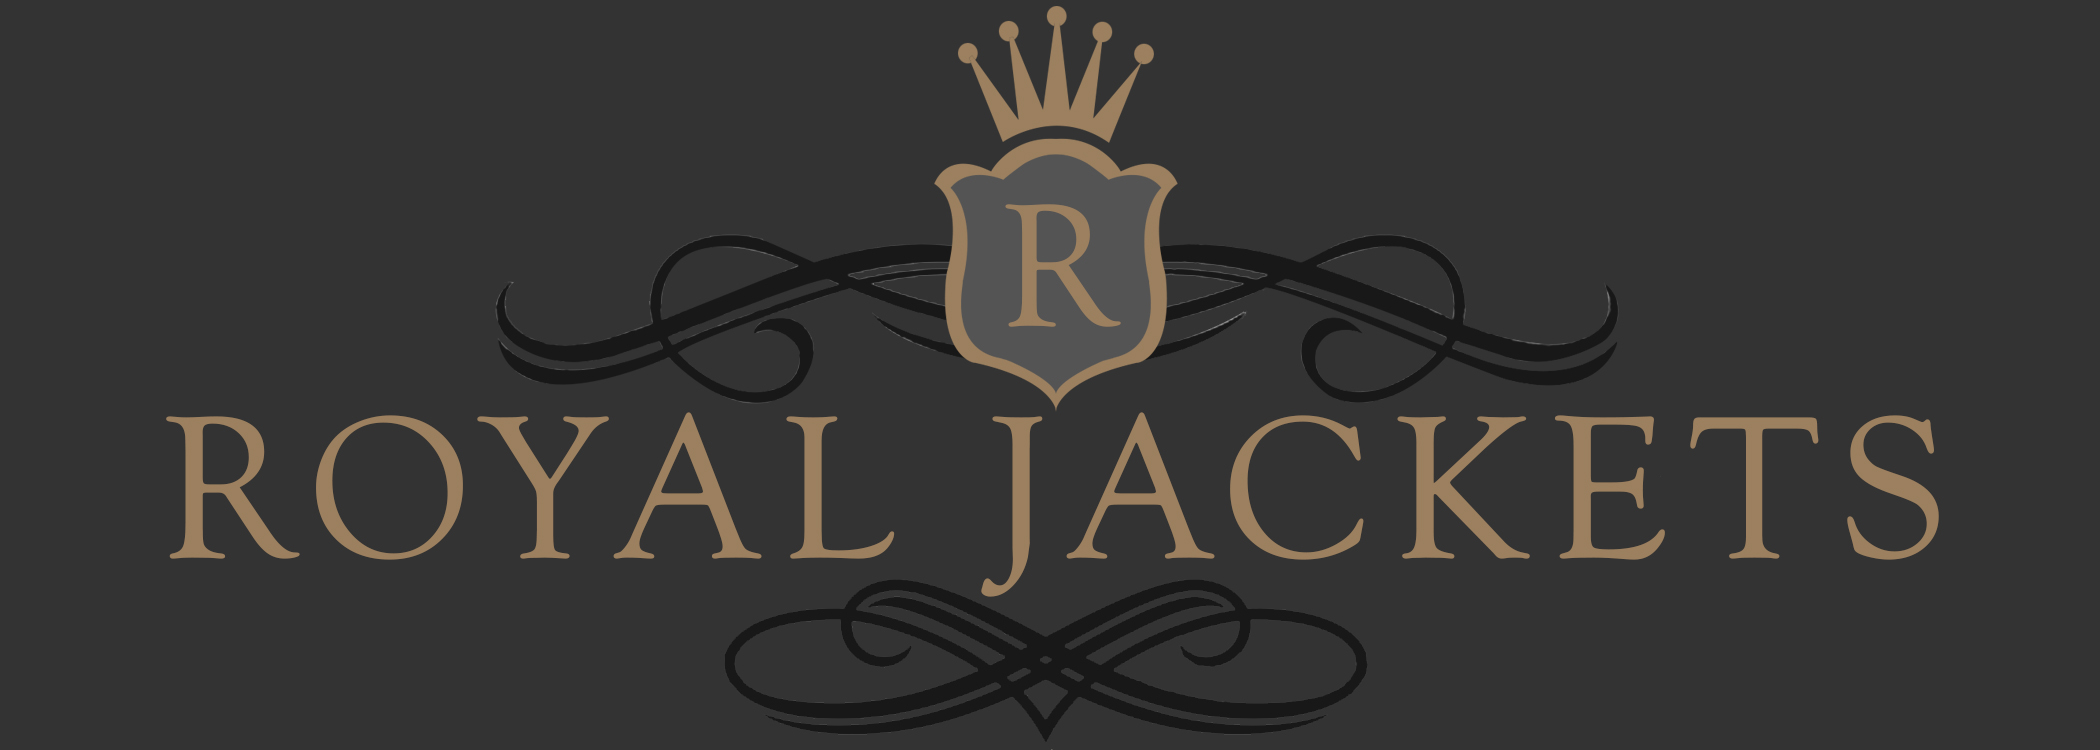 ROYAL JACKETS – LUXURY LEATHER JACKETS FOR MEN AND WOMEN